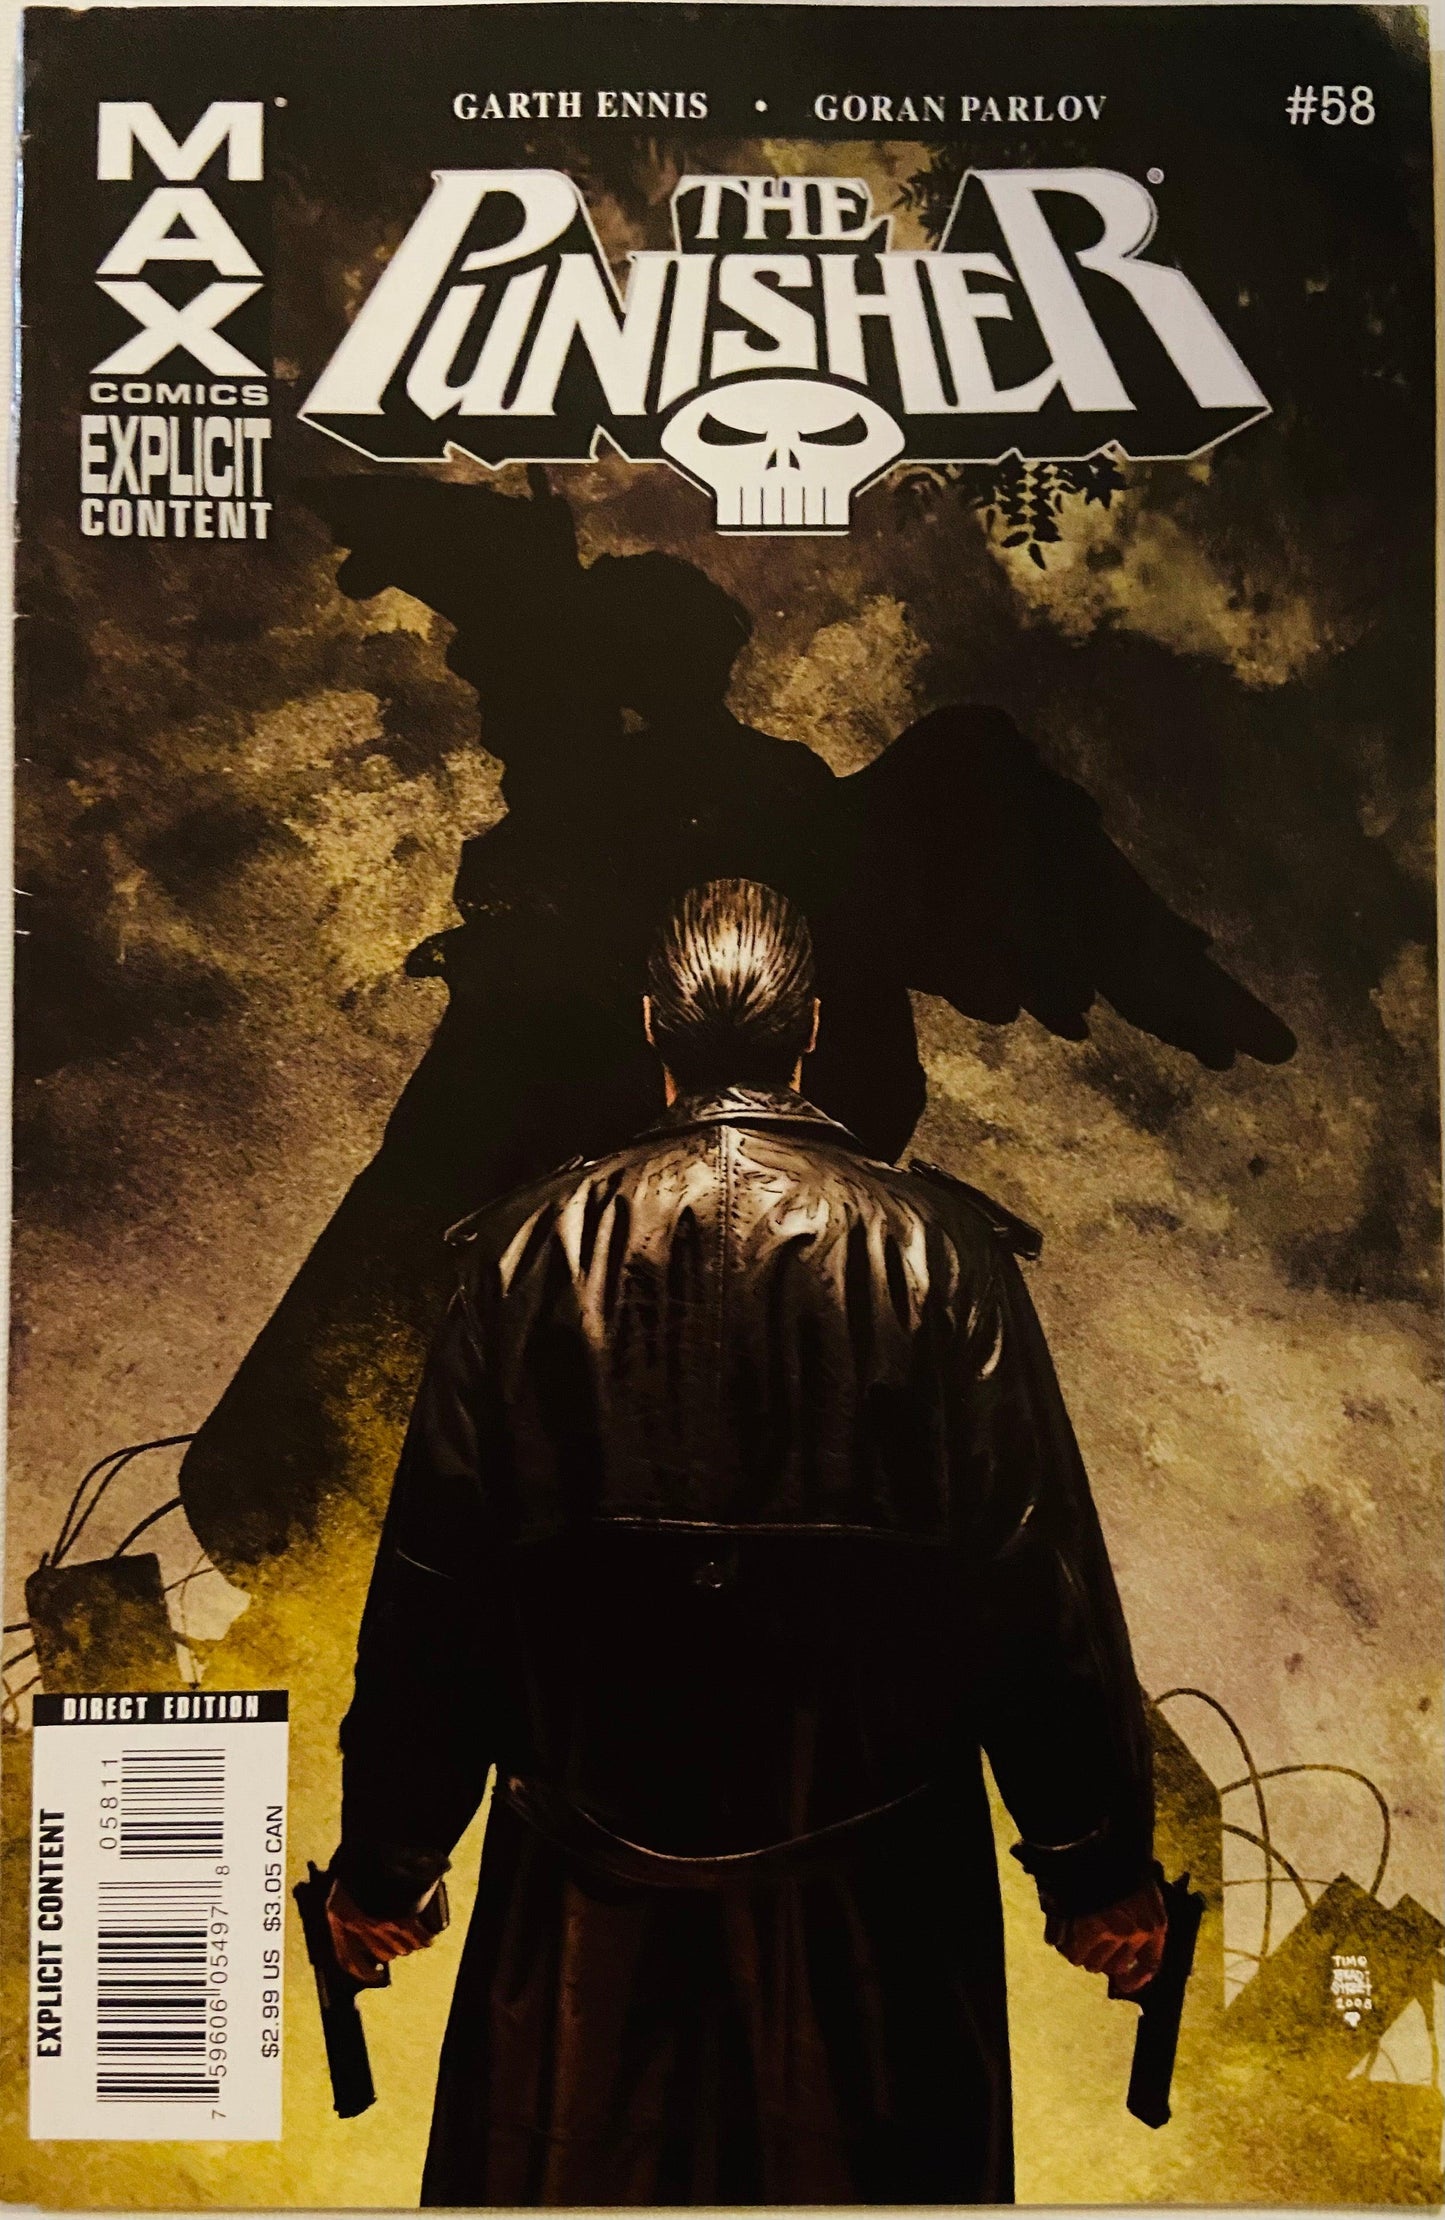 The Punisher #58 - HolyGrail Comix